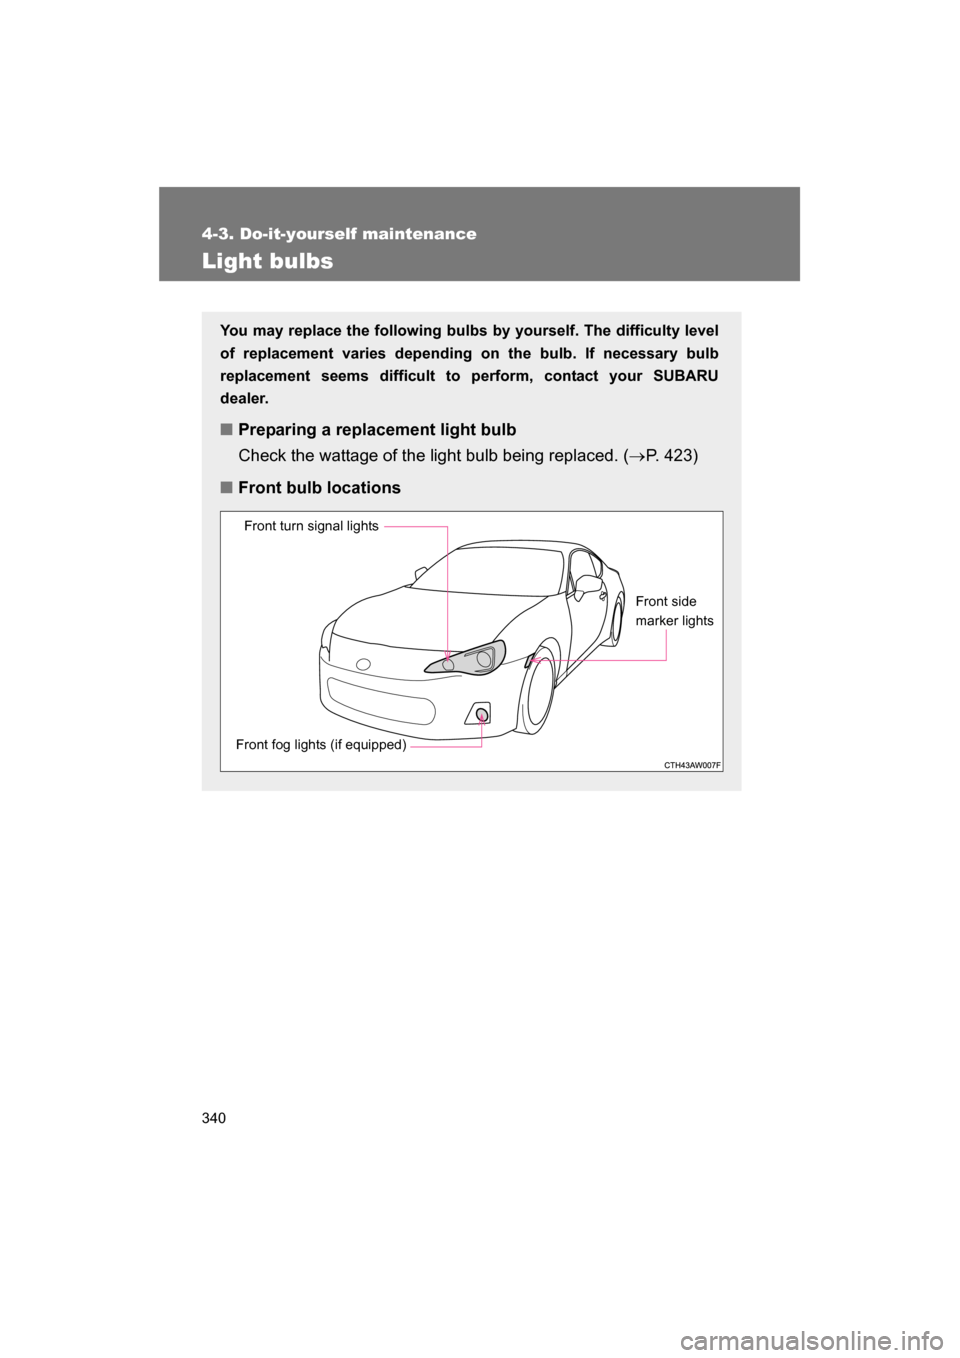 SUBARU BRZ 2014 1.G Owners Manual 340
4-3. Do-it-yourself maintenance
Light bulbs
You may replace the following bulbs by yourself. The difficulty level 
of replacement varies depending on the bulb. If necessary bulb
replacement seems 